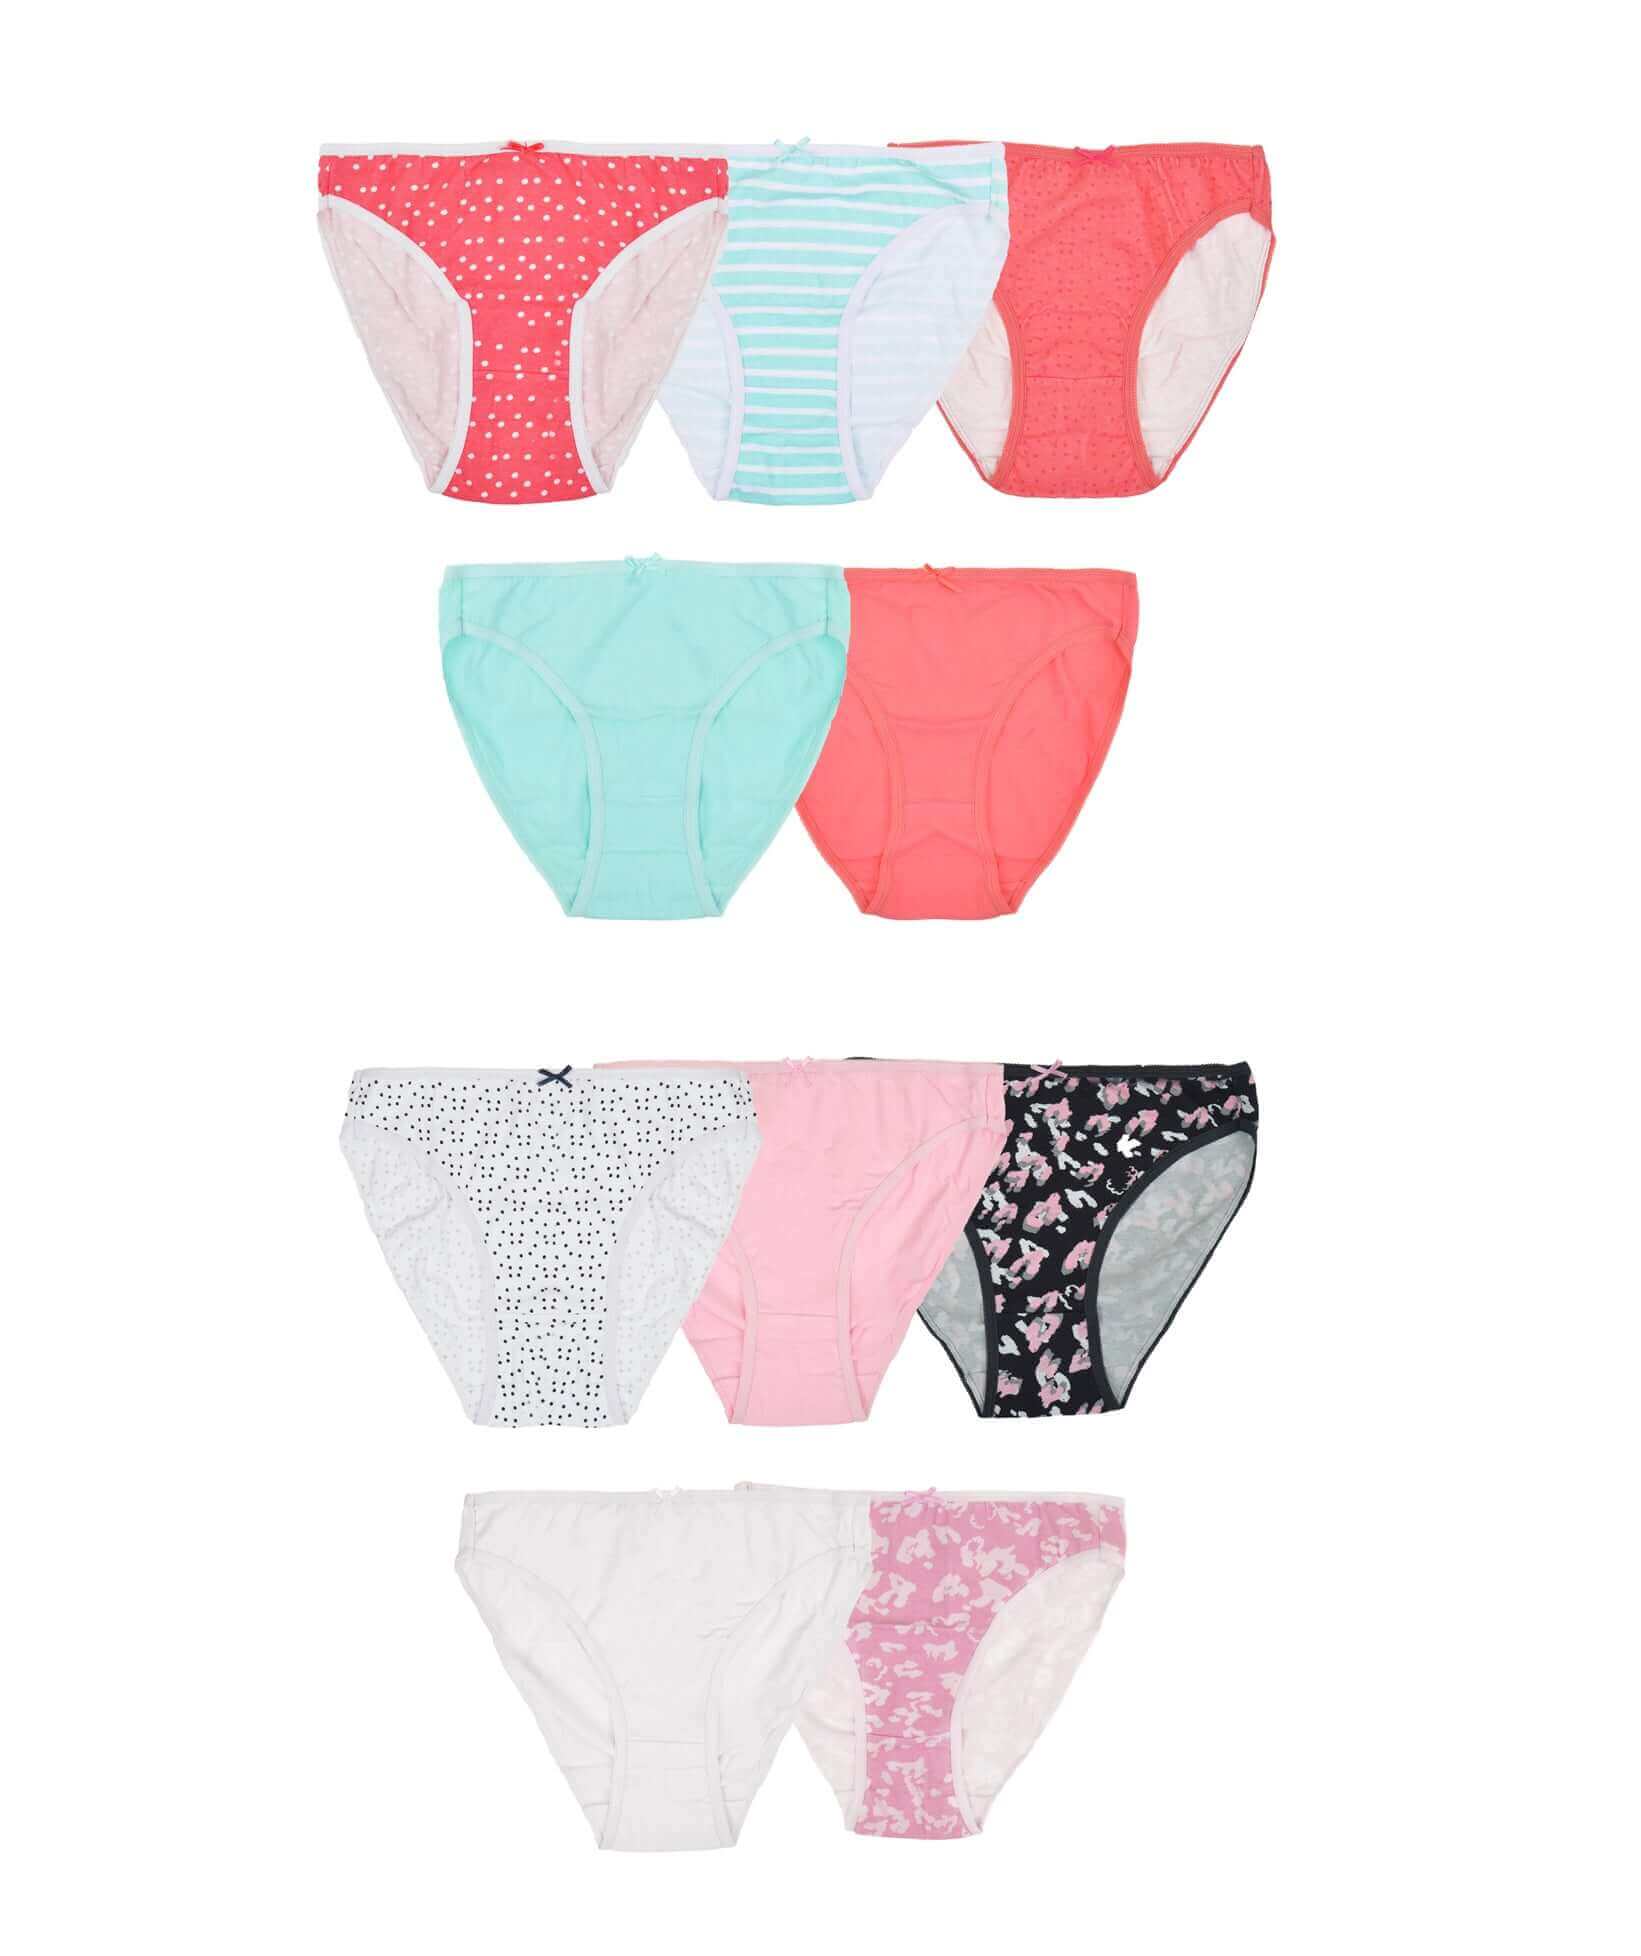 Pack of 10 Women's High Leg Briefs Cotton Panties Knicker Everyday Comfort  Fit Underwear. Buy Now For £14.00.